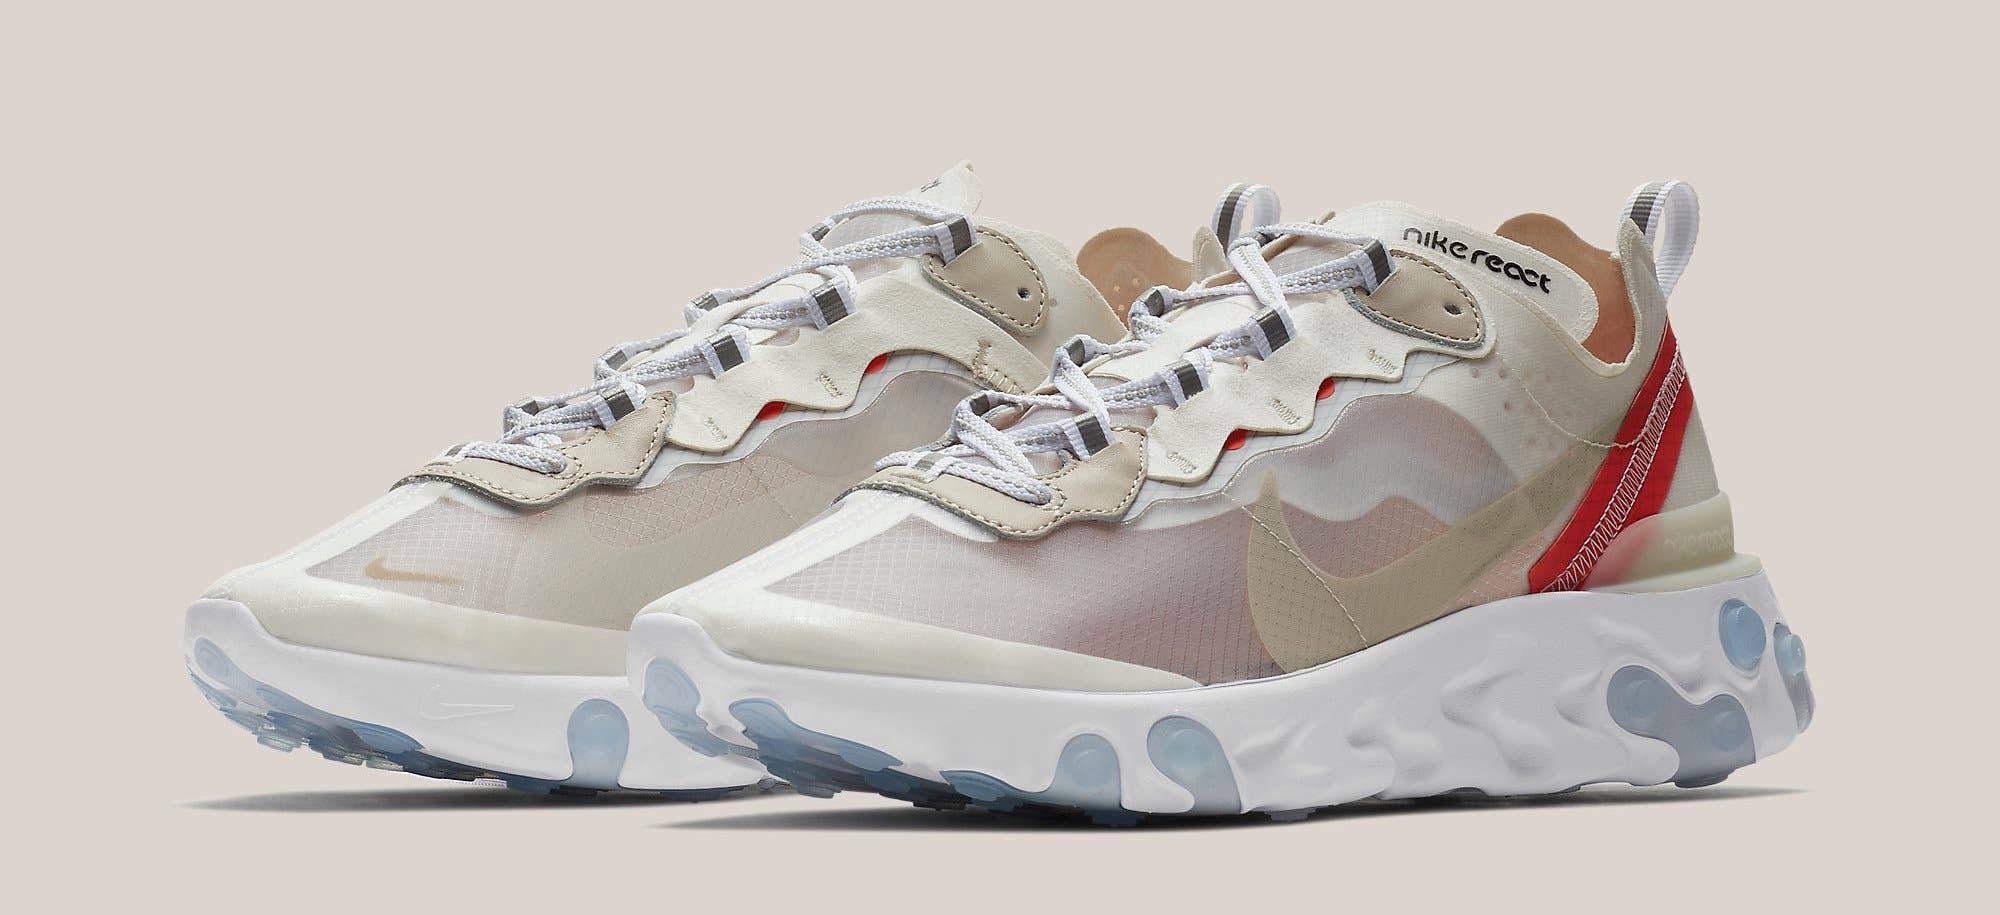 Best Yet the Nike Element 87s Complex